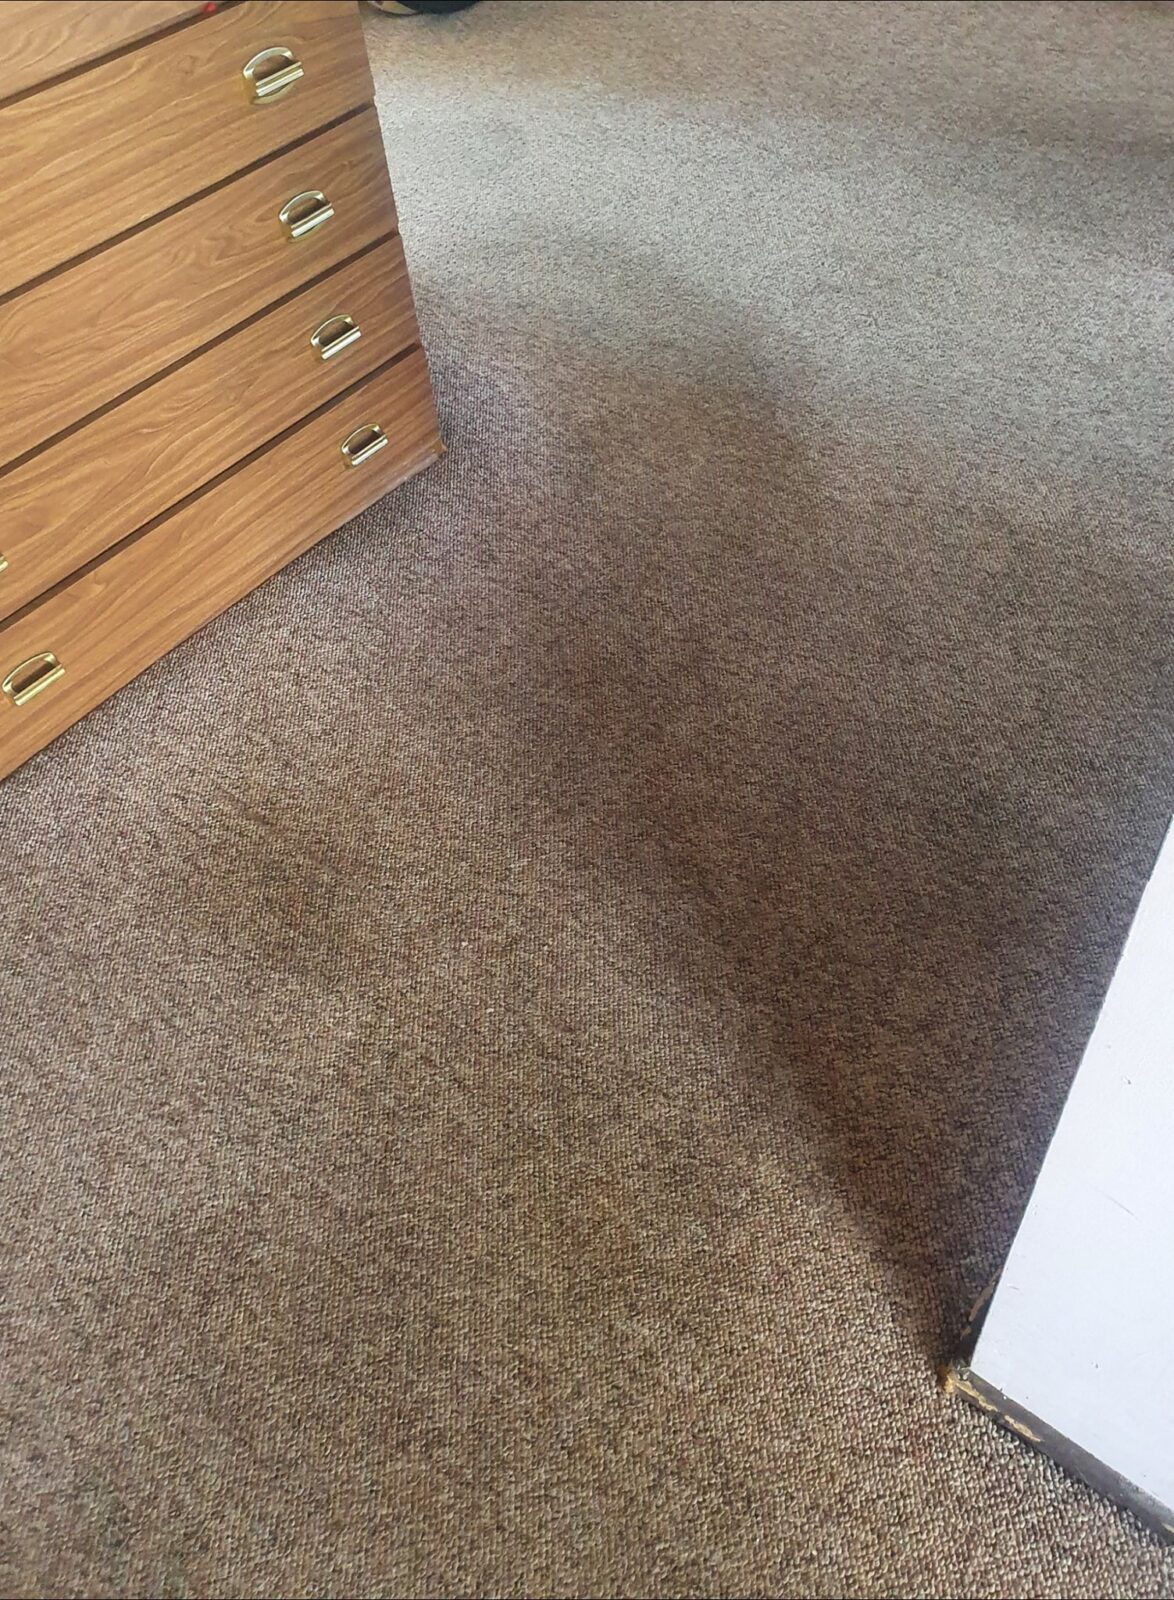 Best Way to Remove Cat Urine From Carpet